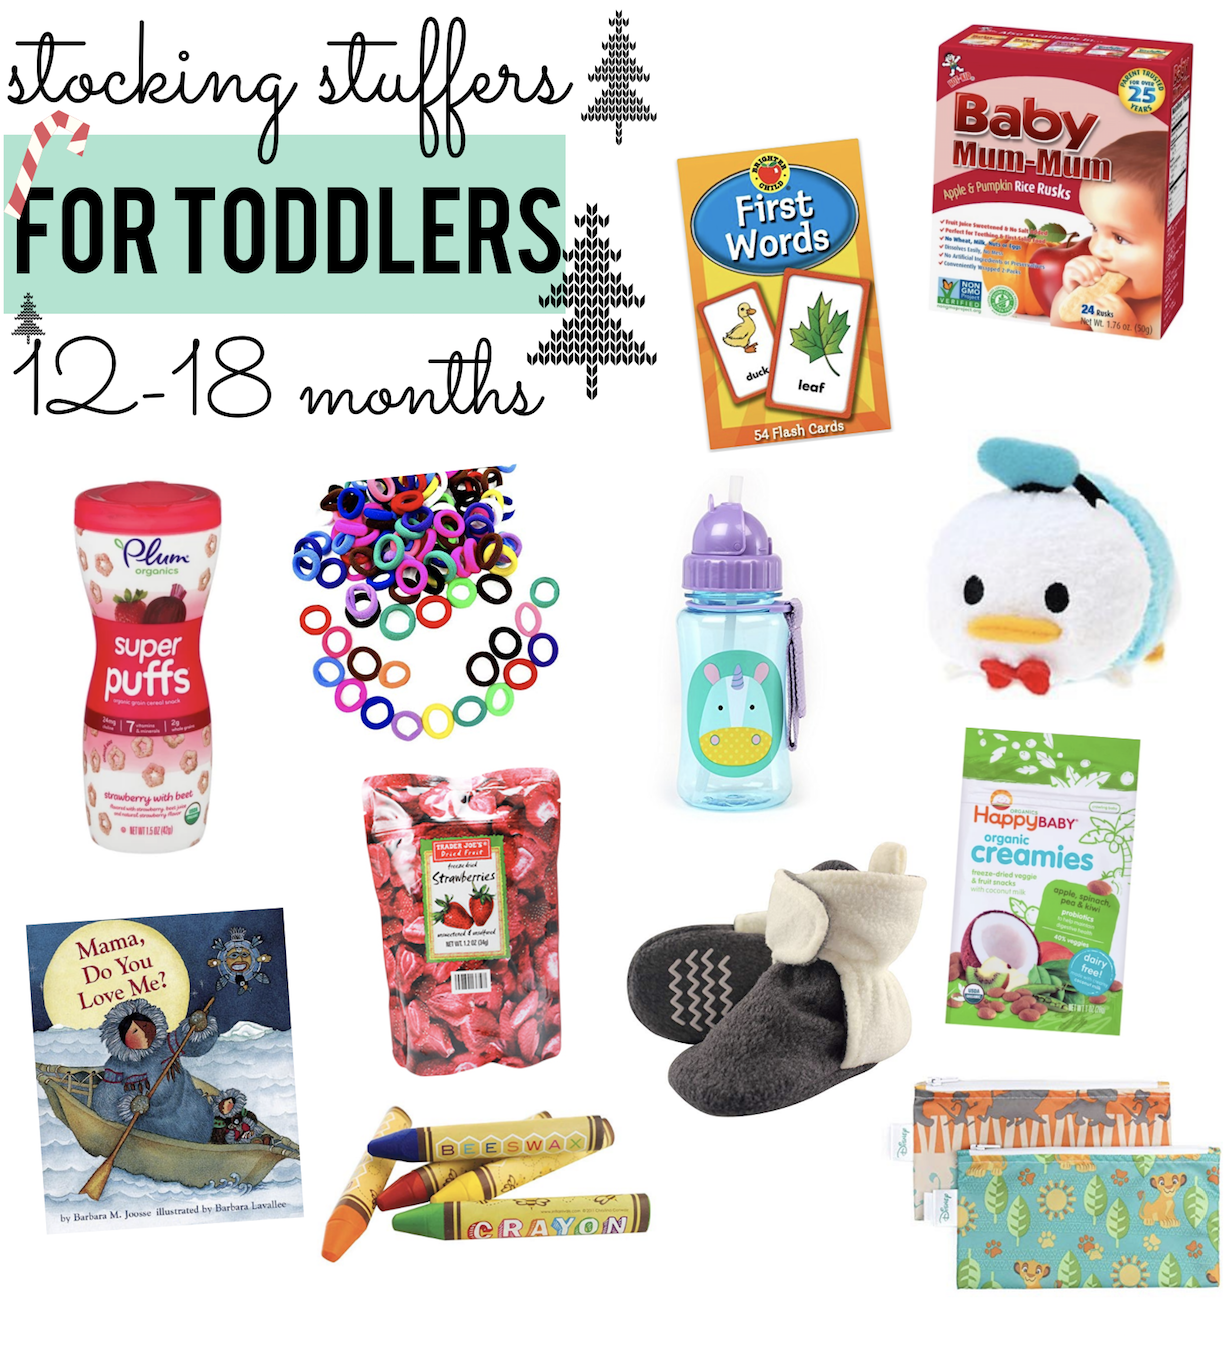 Stocking Stuffers for Toddlers 12-18 Months